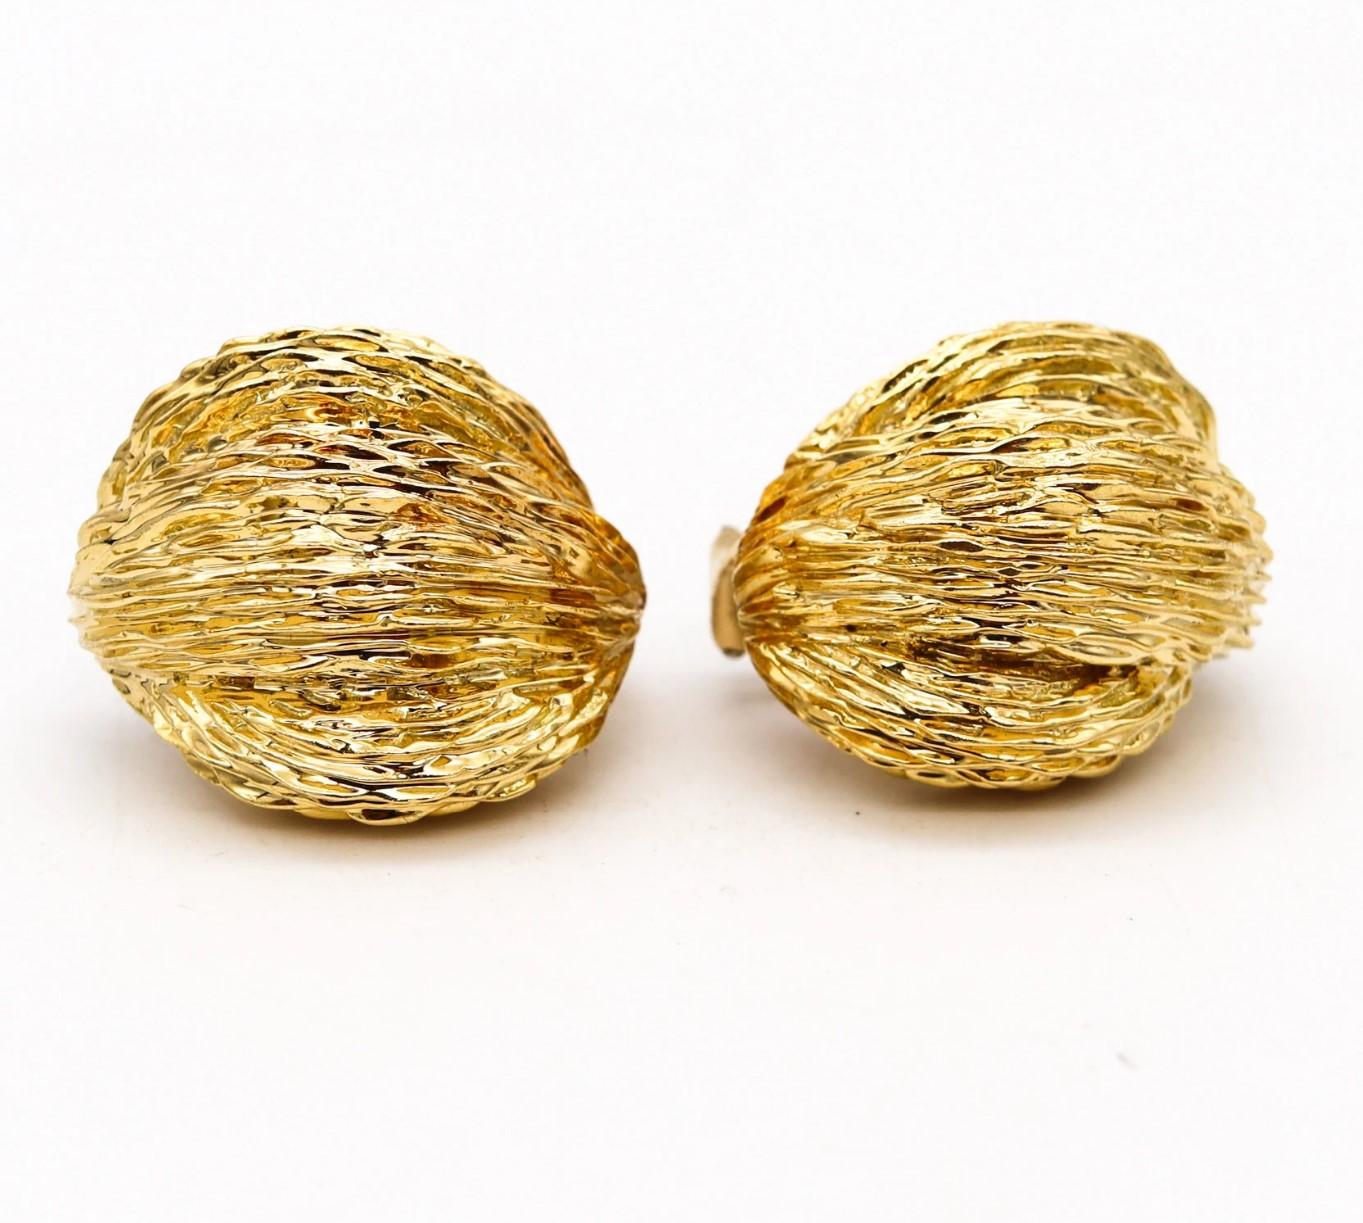 Clips-Earrings designed by Van Cleef & Arpels.

Gorgeous bold pieces, created by the house of Van Cleef & Arpels, back in the 1970's. This pair of clips earrings has been crafted in highly textured solid yellow gold of 18 karats. Suited with omega